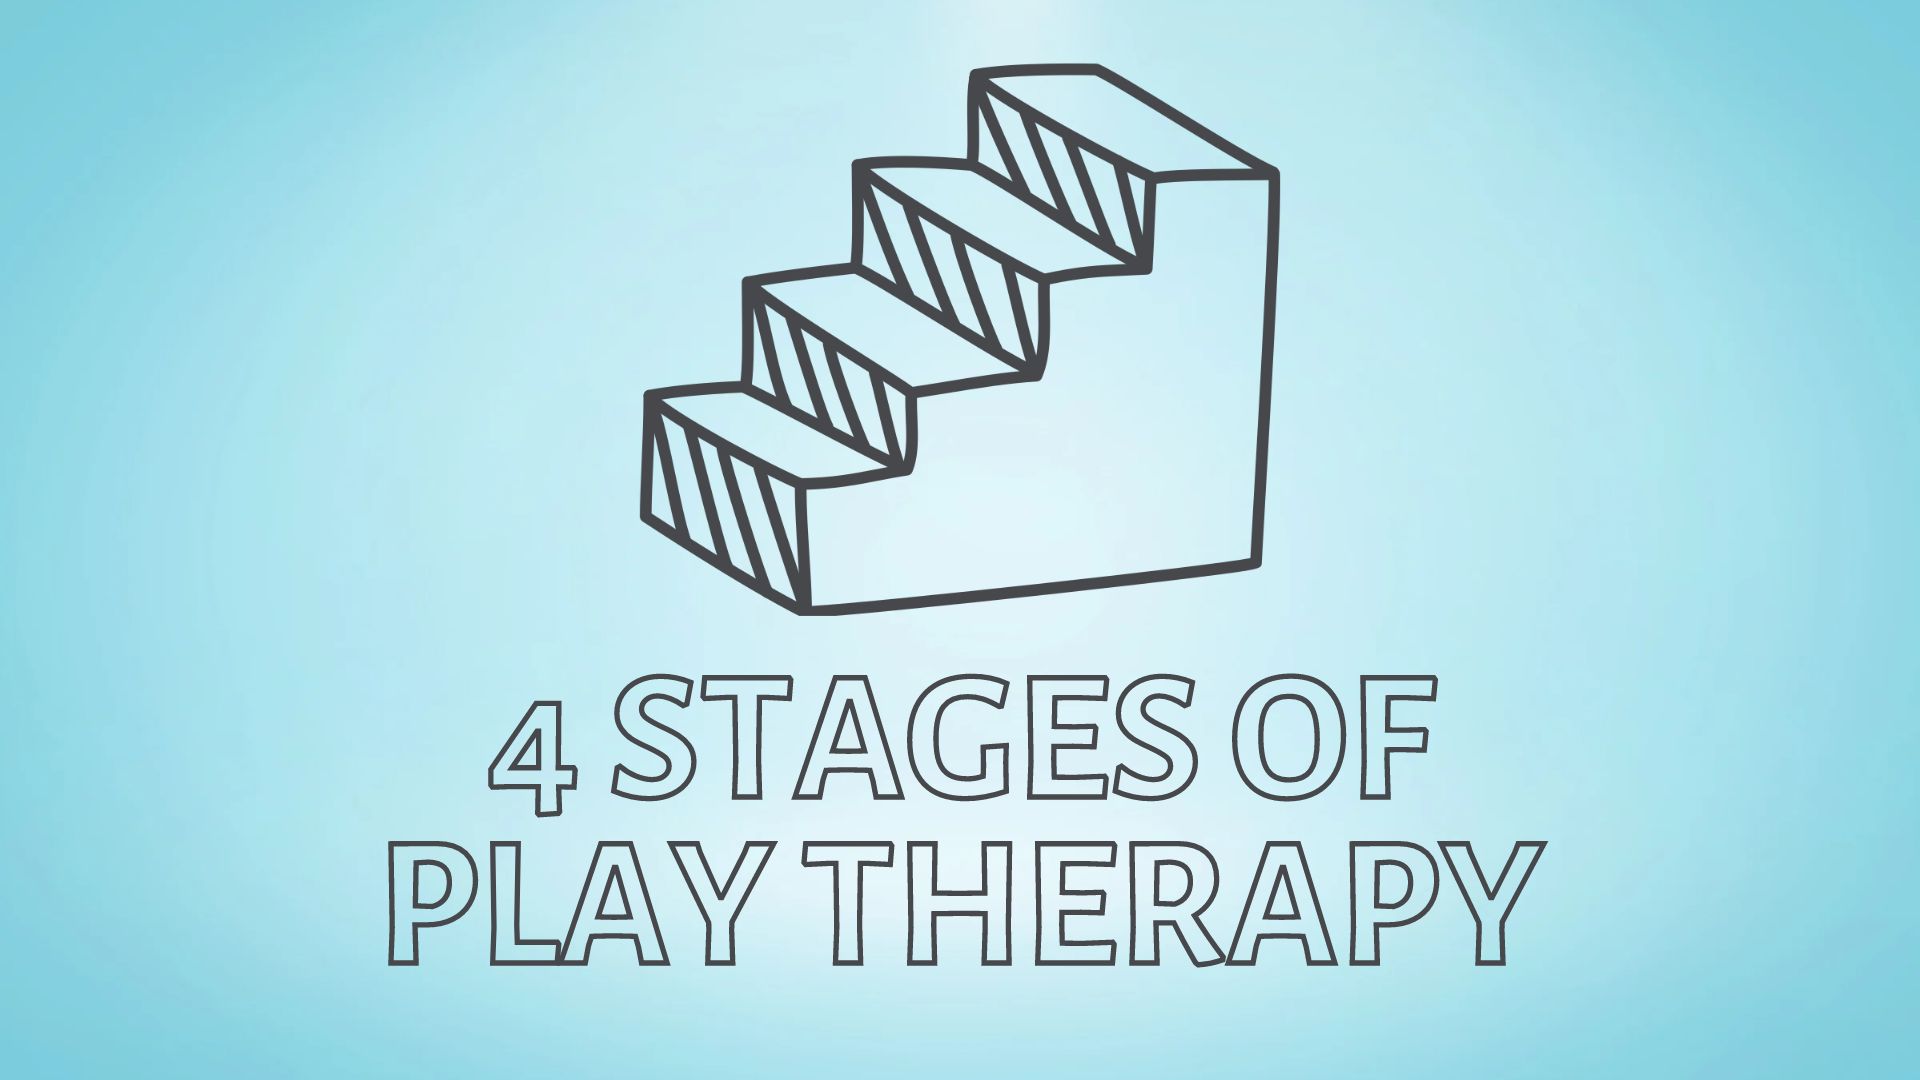 4 Stages Of Play Therapy (The Child’s Therapeutic Progress)